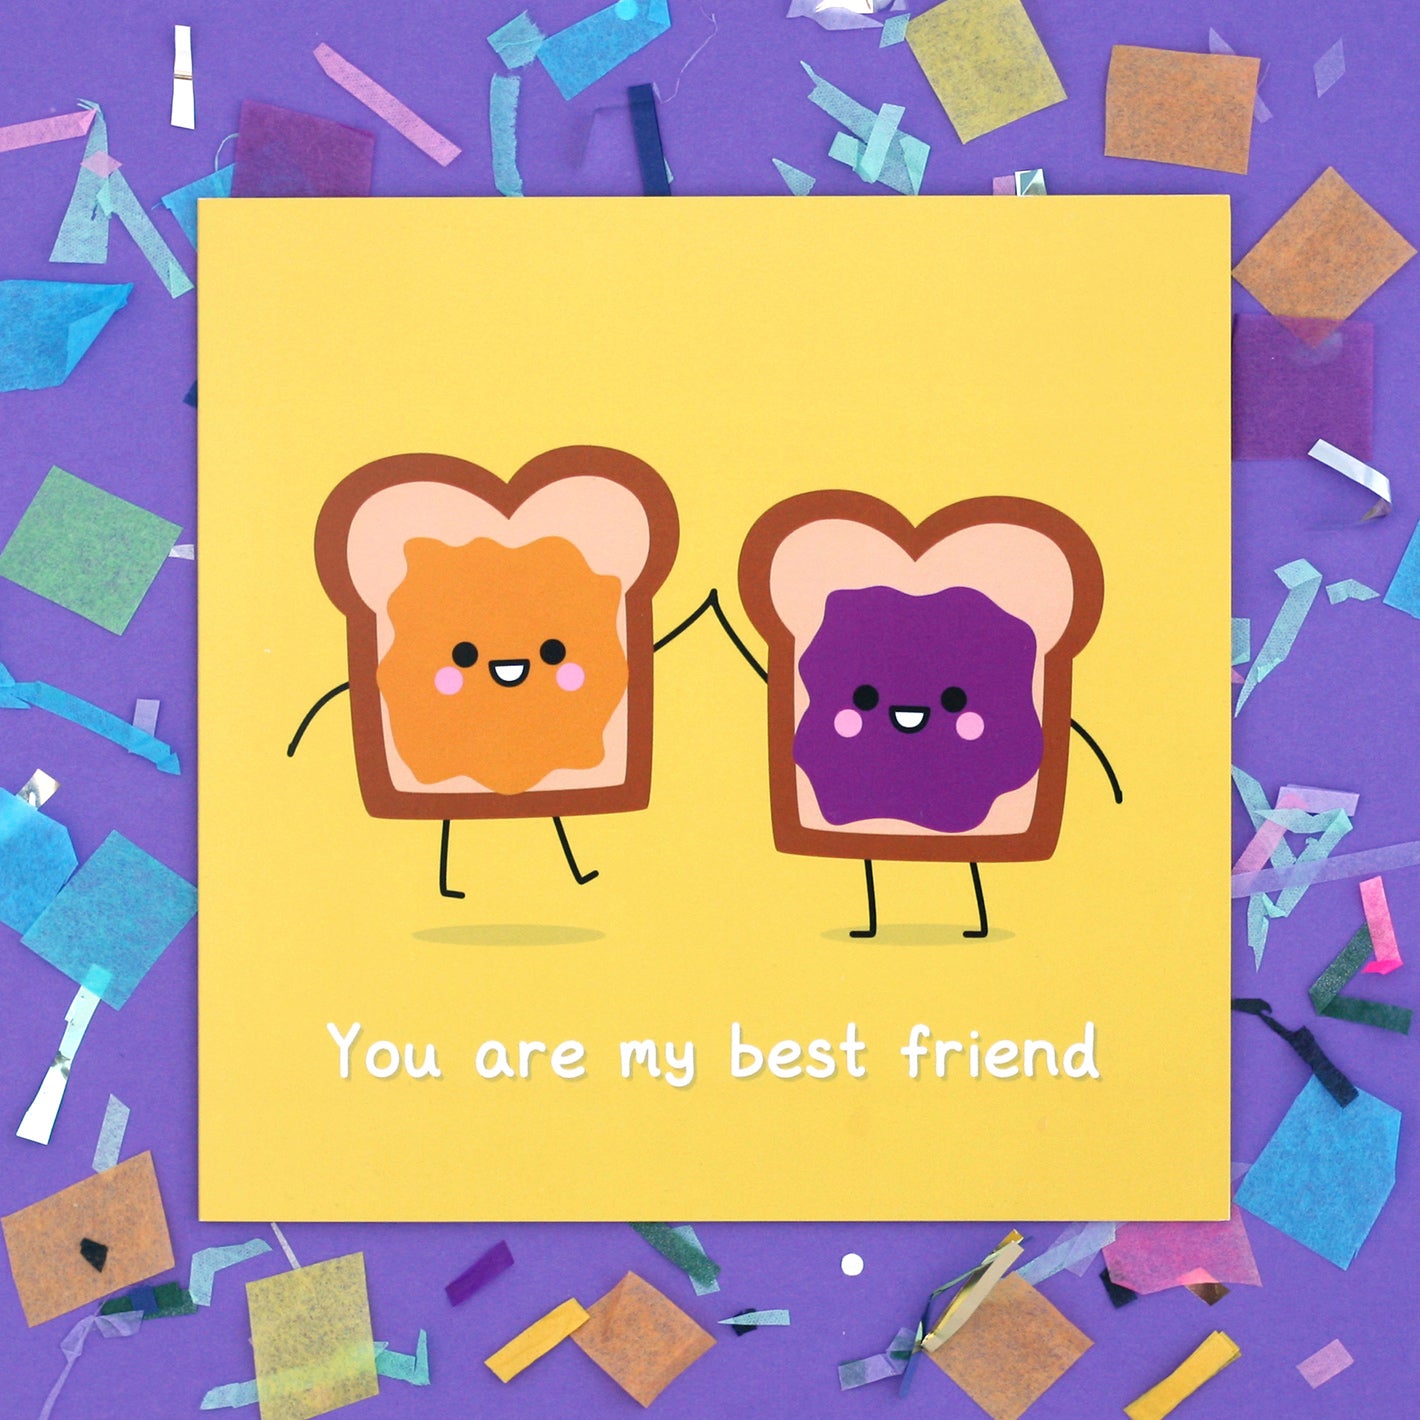 Peanut Butter and Jelly Sandwiches Best Friend Card